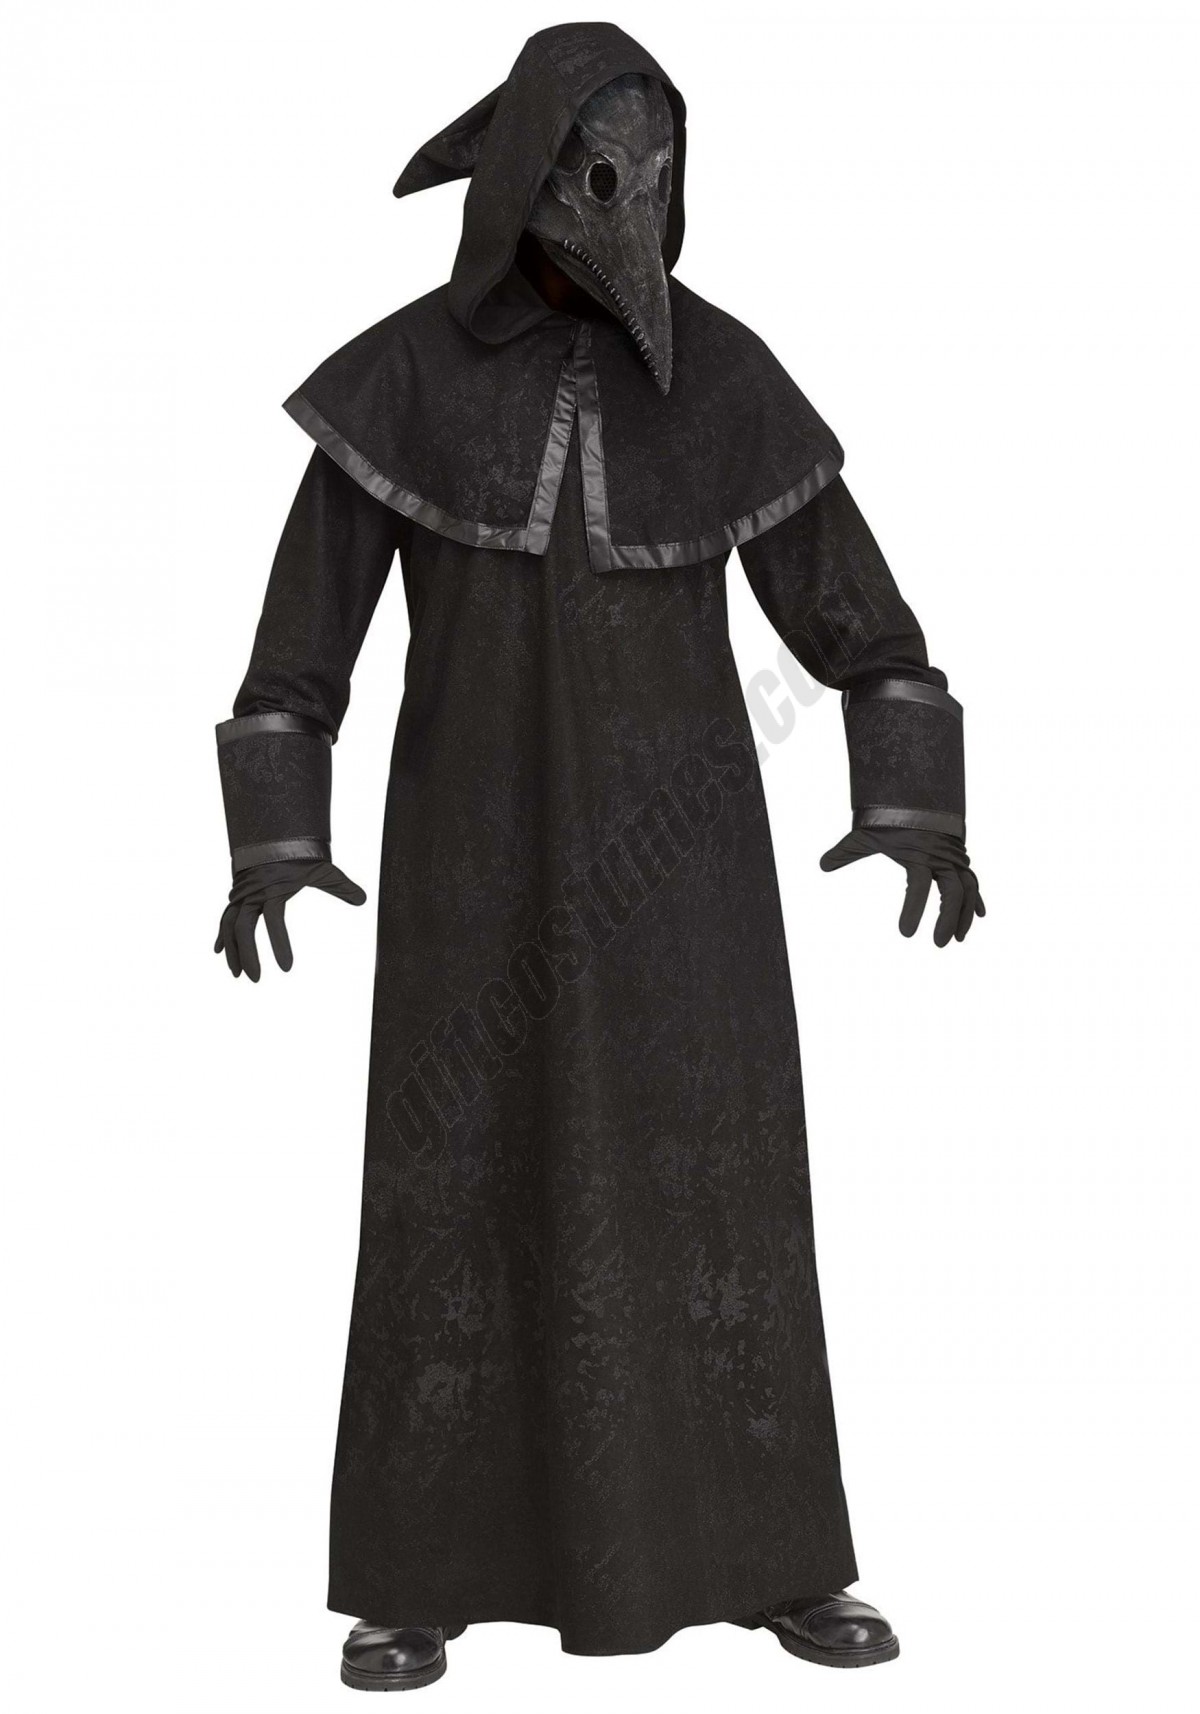 Black Plague Doctor Costume for Adults - Women's - -0